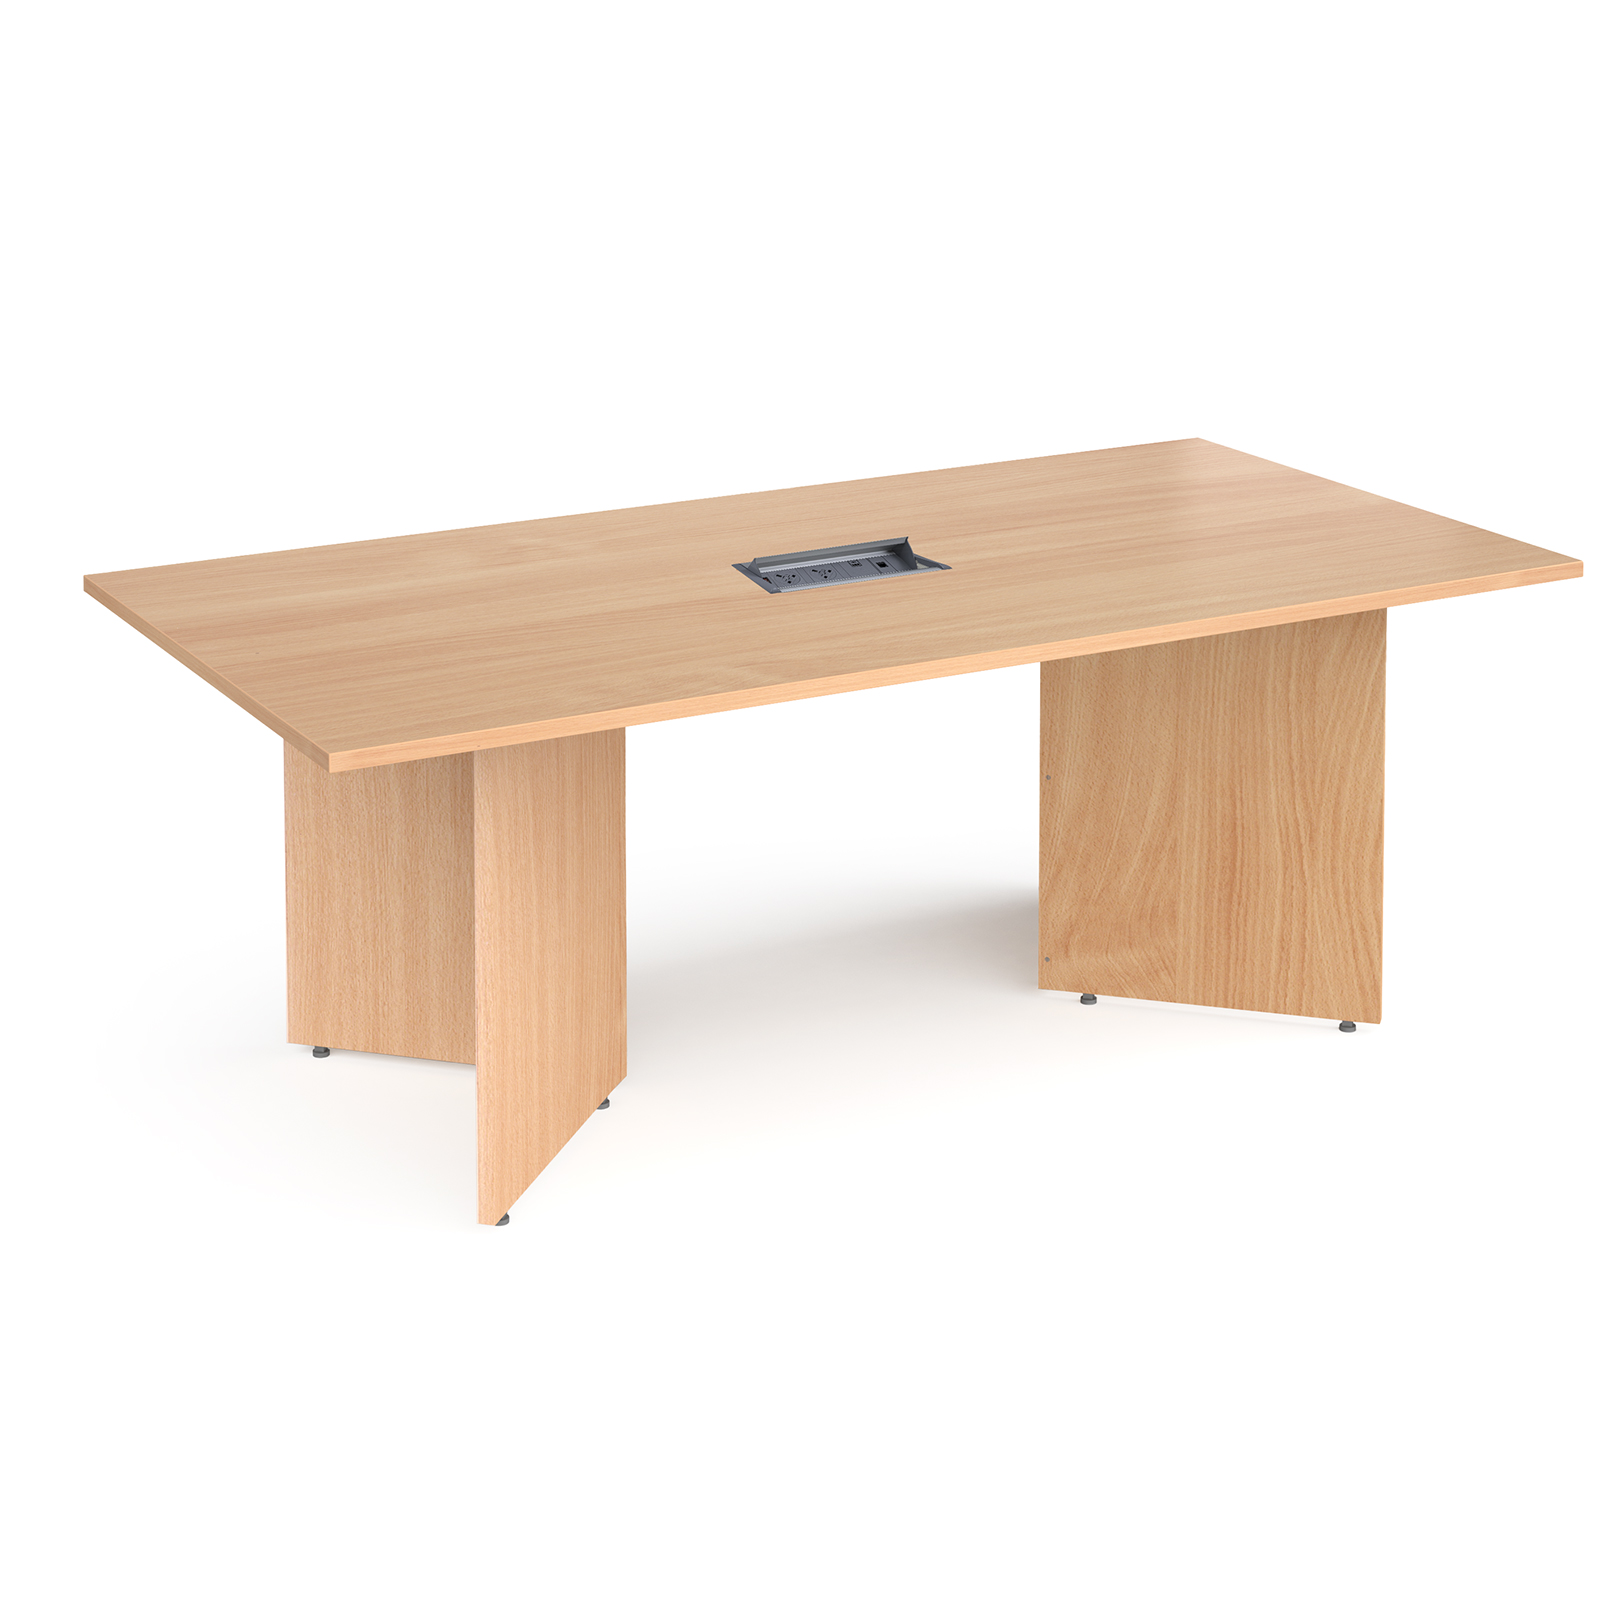 Boardroom / Meeting Arrow head leg rectangular boardroom table 2000mm x 1000mm in beech with central cutout and Aero power module